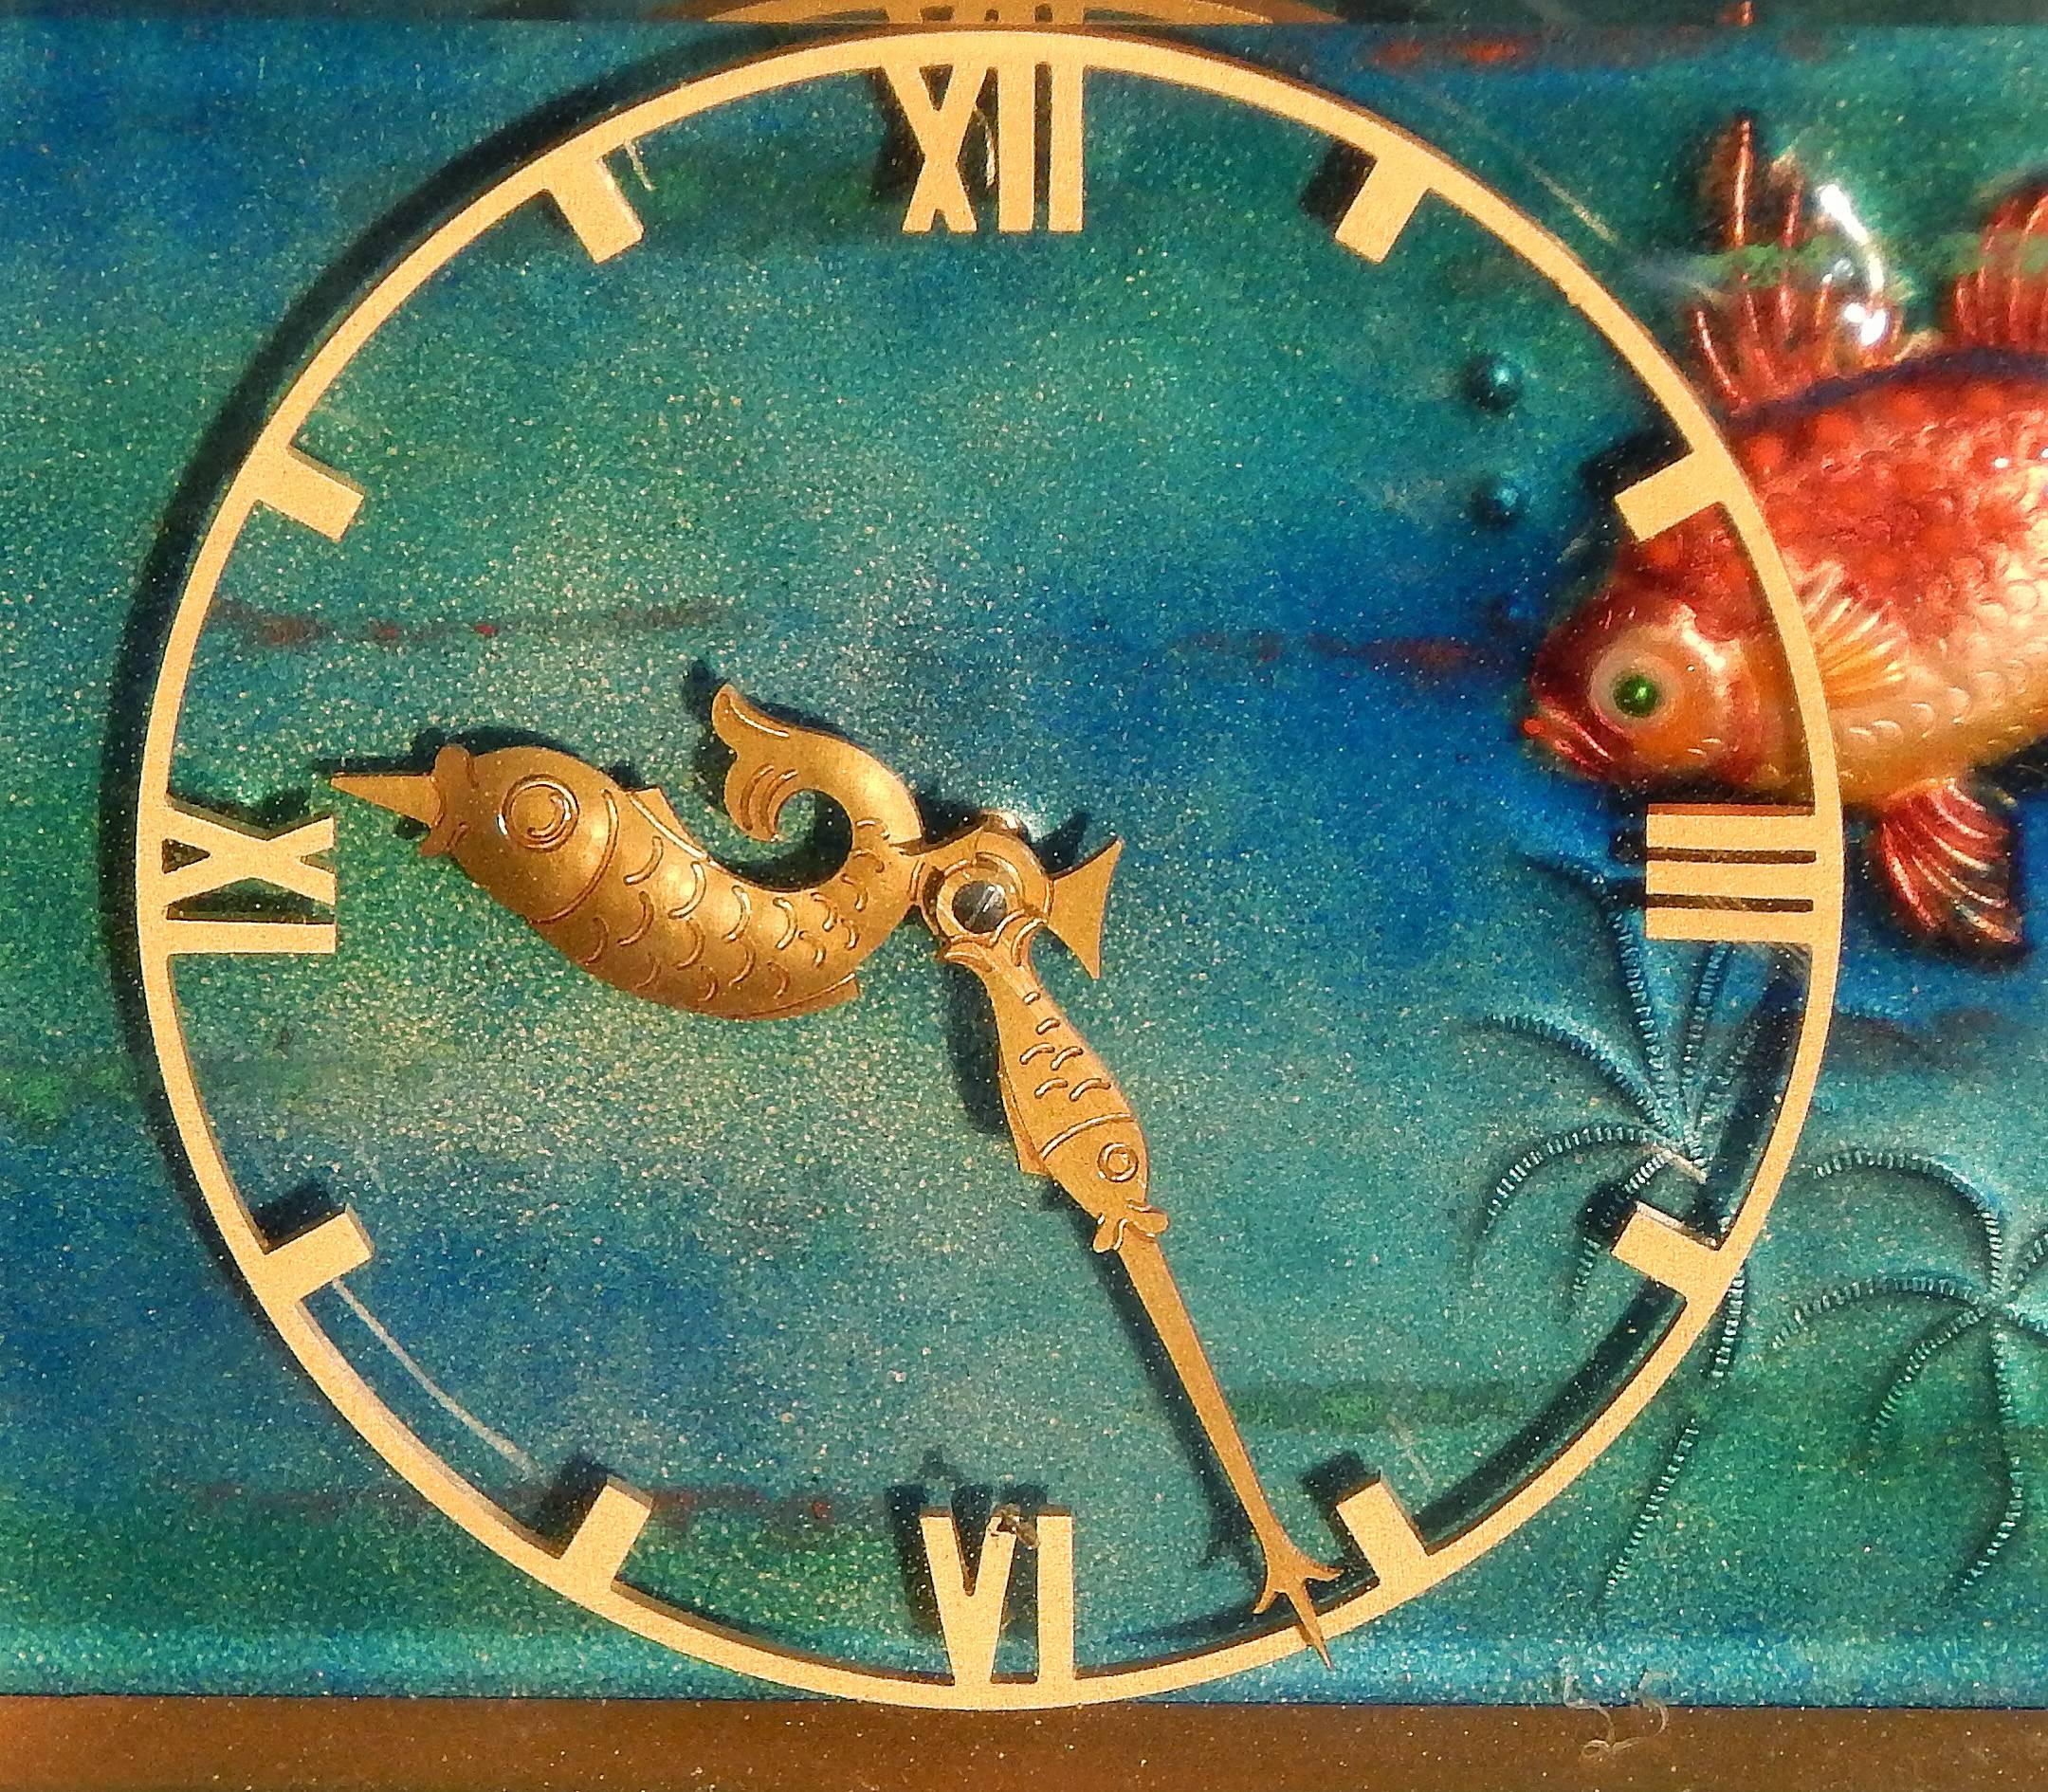 An especially fine and rare Art Deco clock, this aquatic-themed desktop piece was made by Arthur Imhof in Switzerland, probably not long after he begin to make clocks in 1939. The brilliantly-hued enameled fish on the face of the clock, together